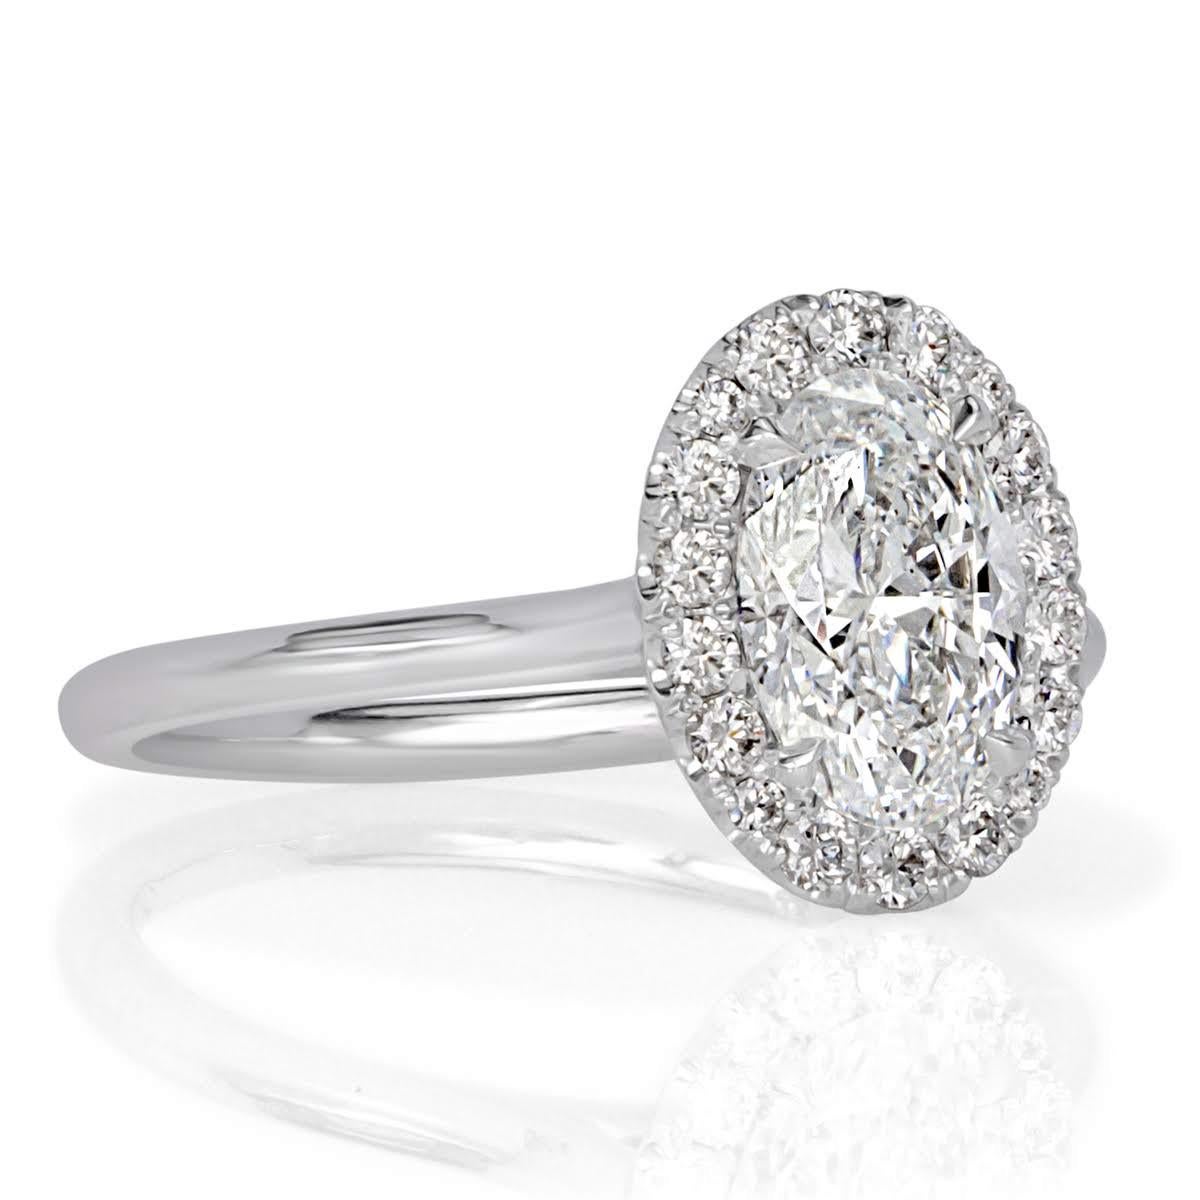 This truly ravishing diamond engagement ring features an exquisite 1.22ct oval cut center diamond, GIA certified at D in color, VS2 in clarity. It is exceptionally white and surrounded by a halo of small round brilliant cut diamonds as well as